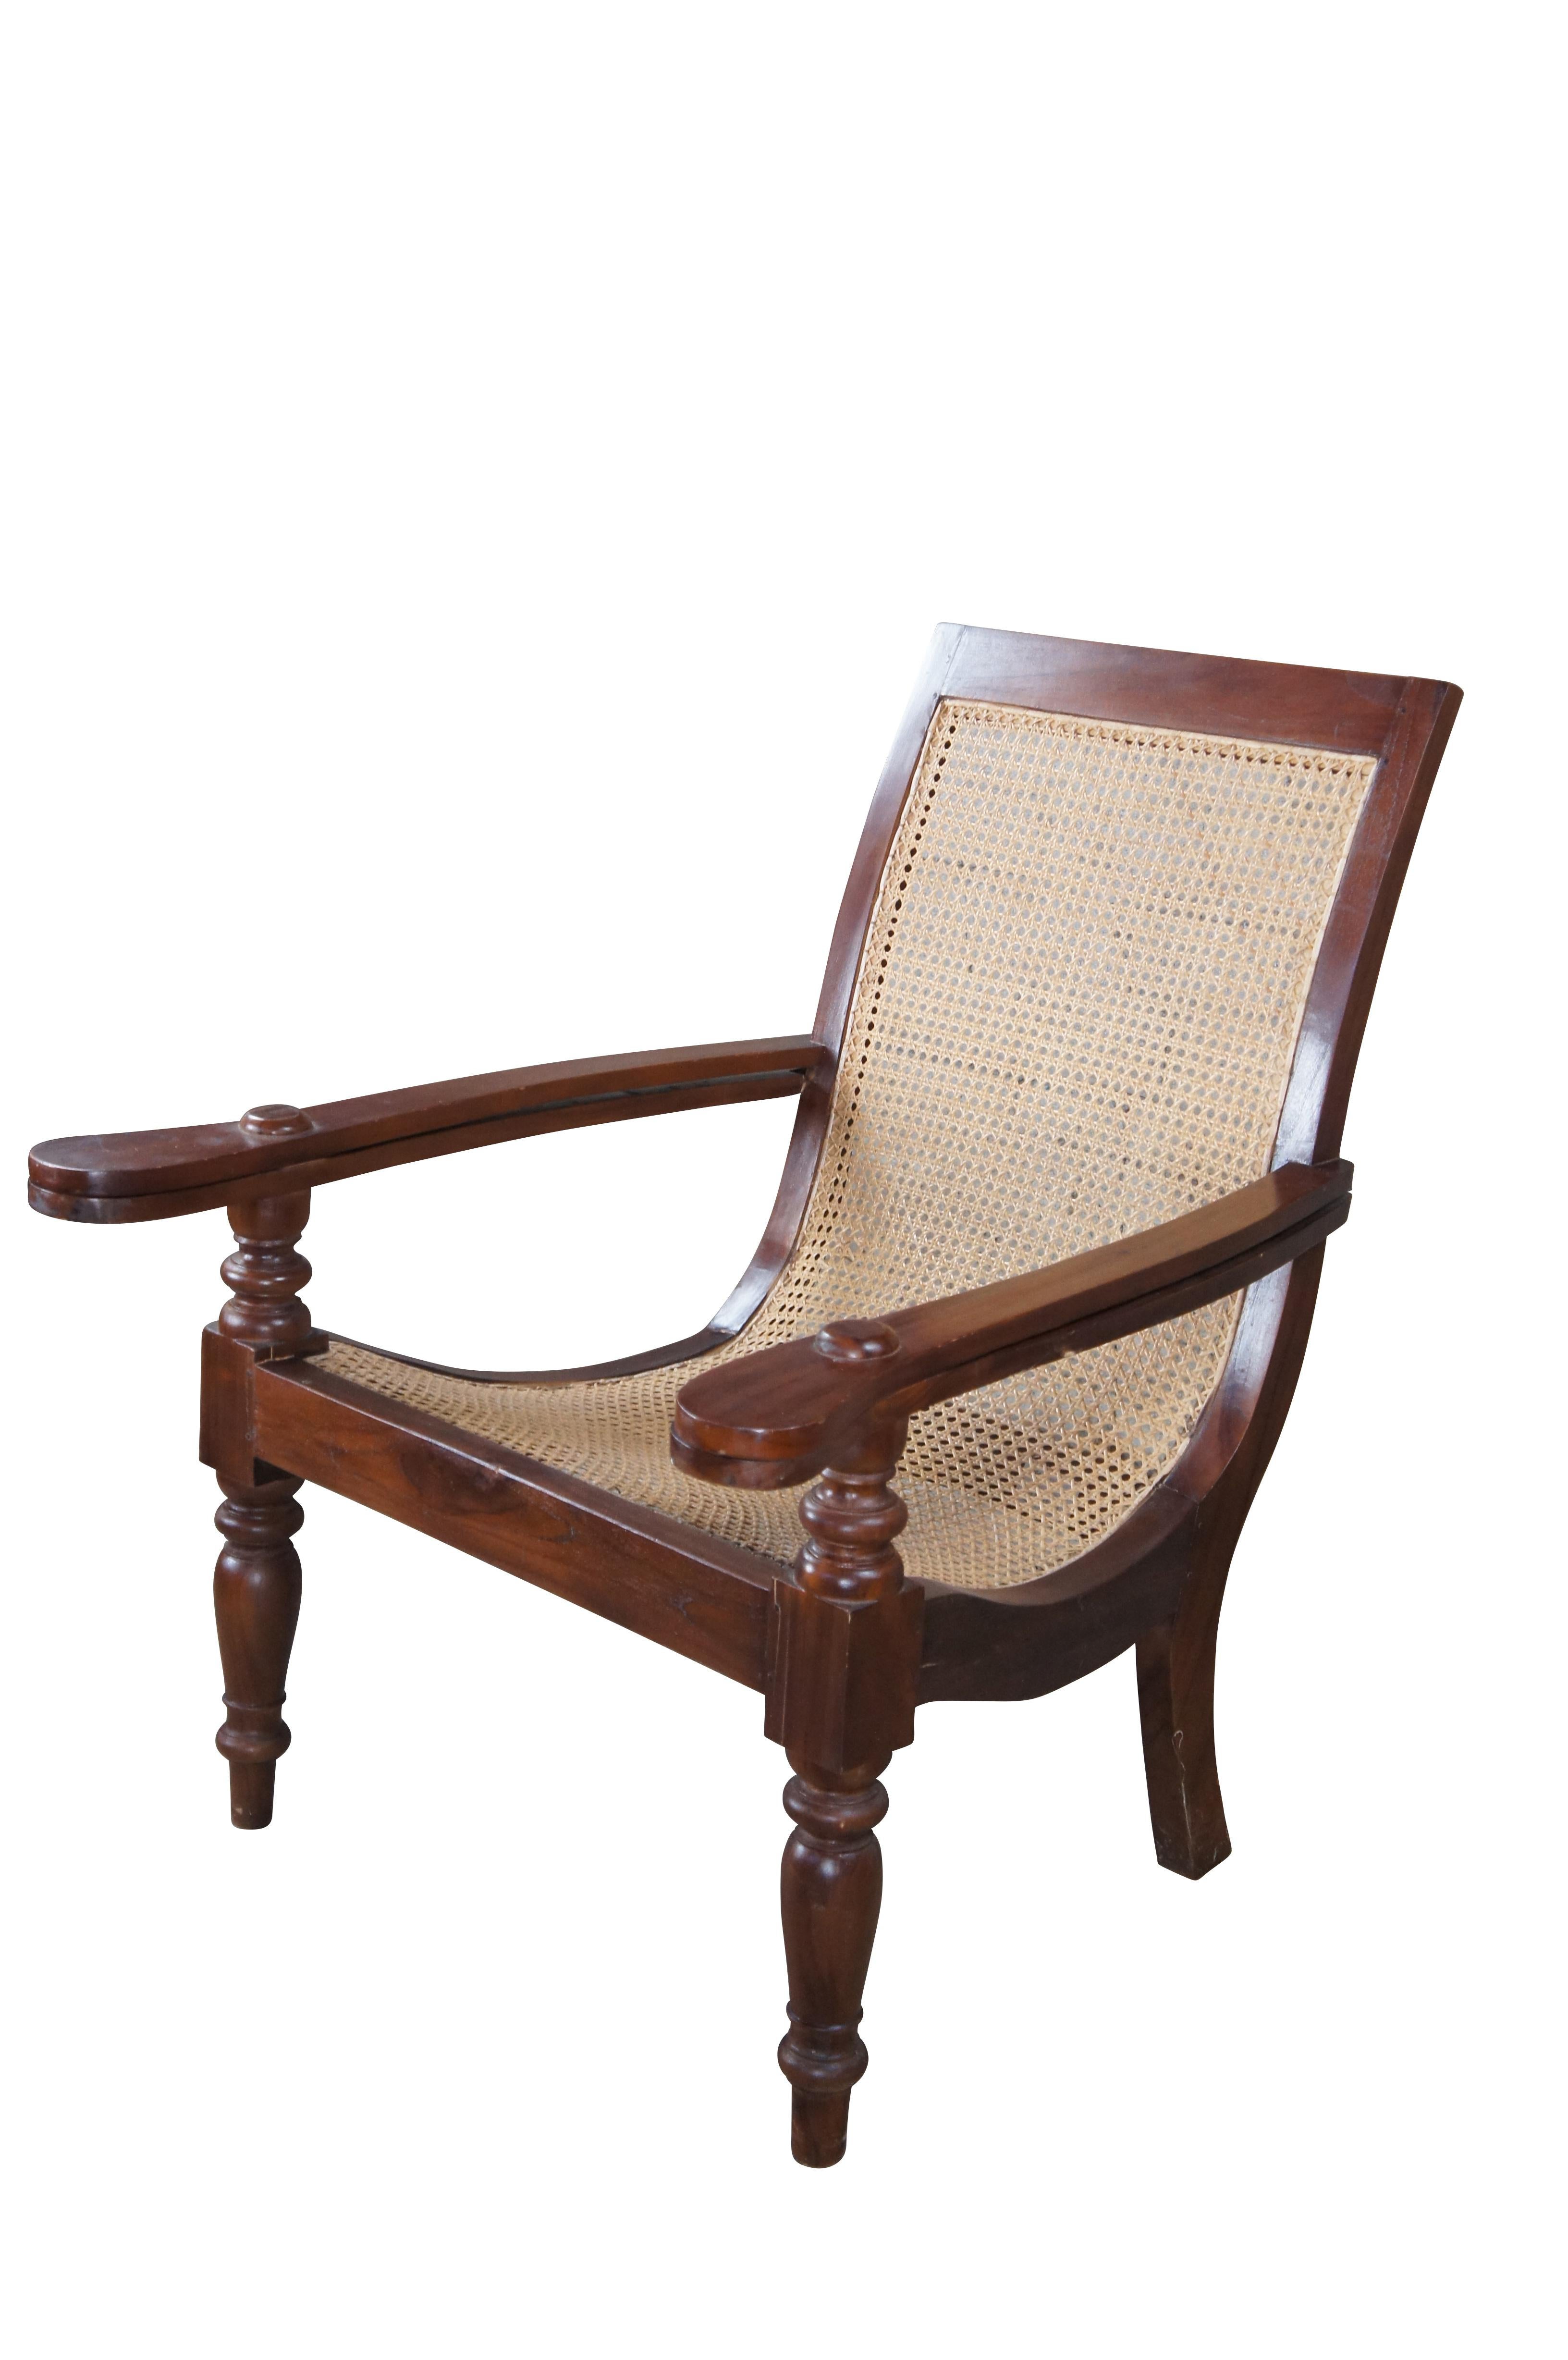 20th century British Colonial Anglo Indian plantation chair. Made from teak in mortise and tenon joinery with a relaxed lounged frame and long extendable arms. Features a relaxed swoop seat with caning throughout. The frame is supported by turned